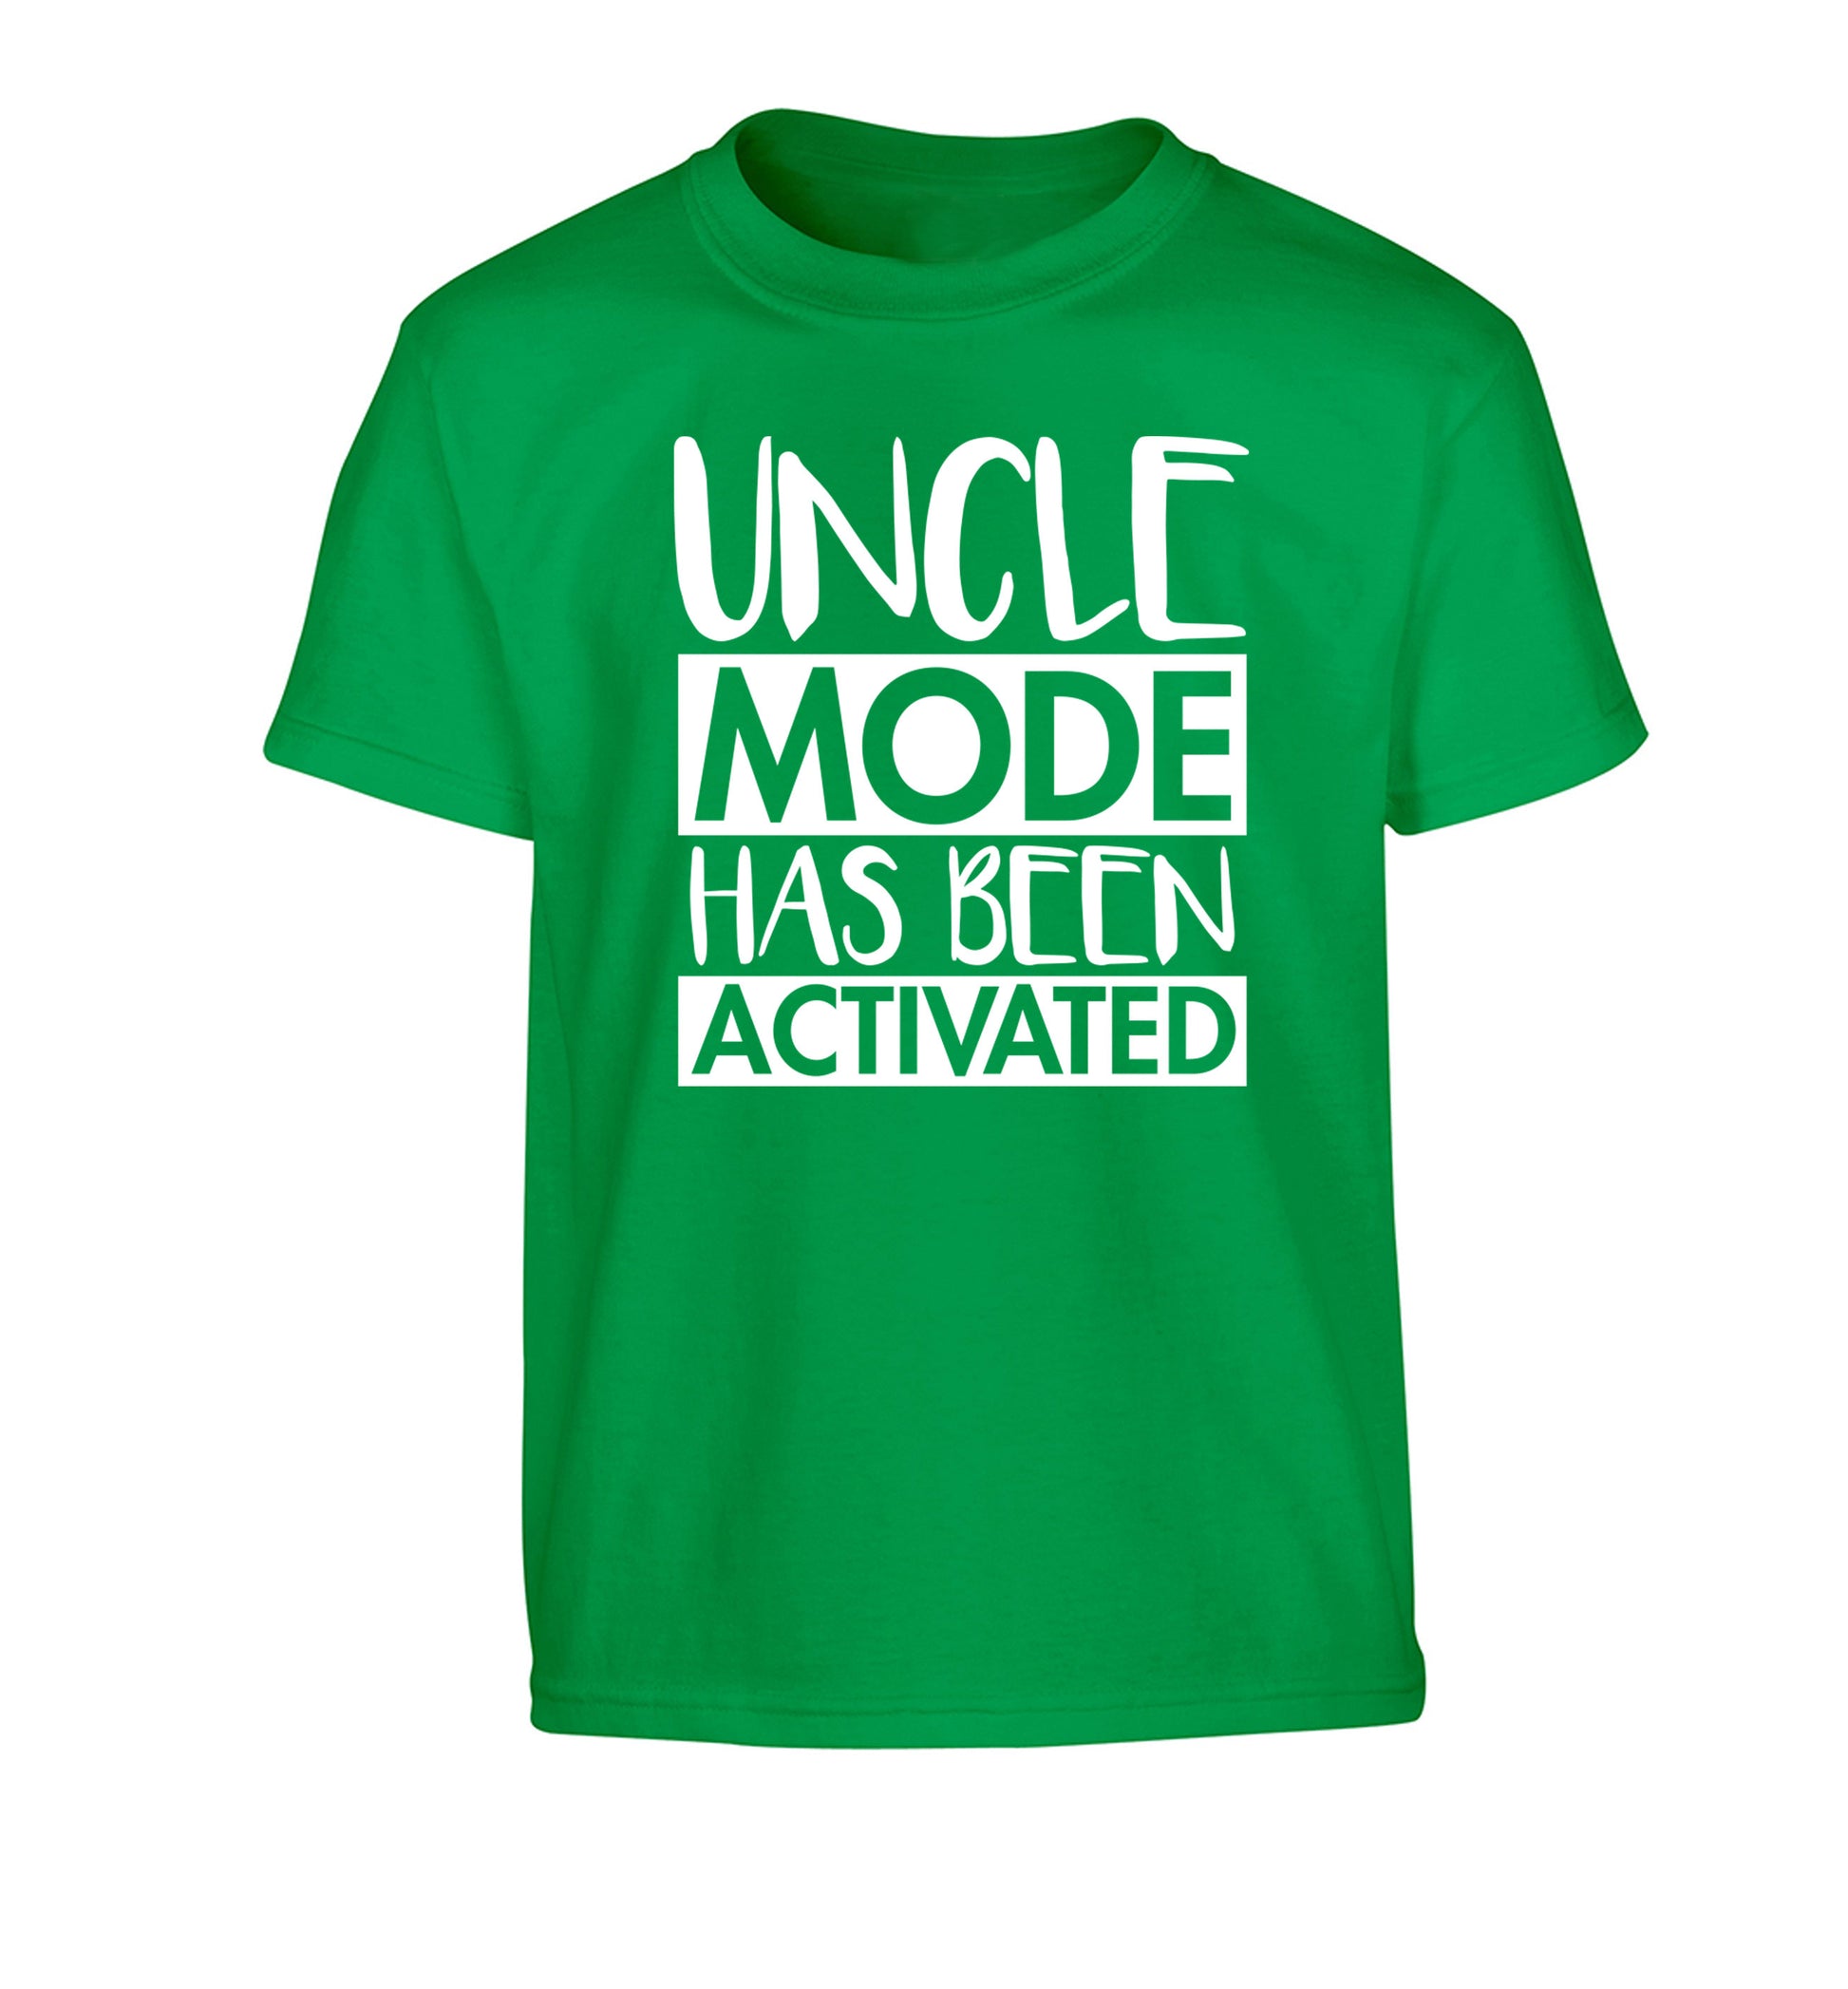 Uncle mode activated Children's green Tshirt 12-14 Years